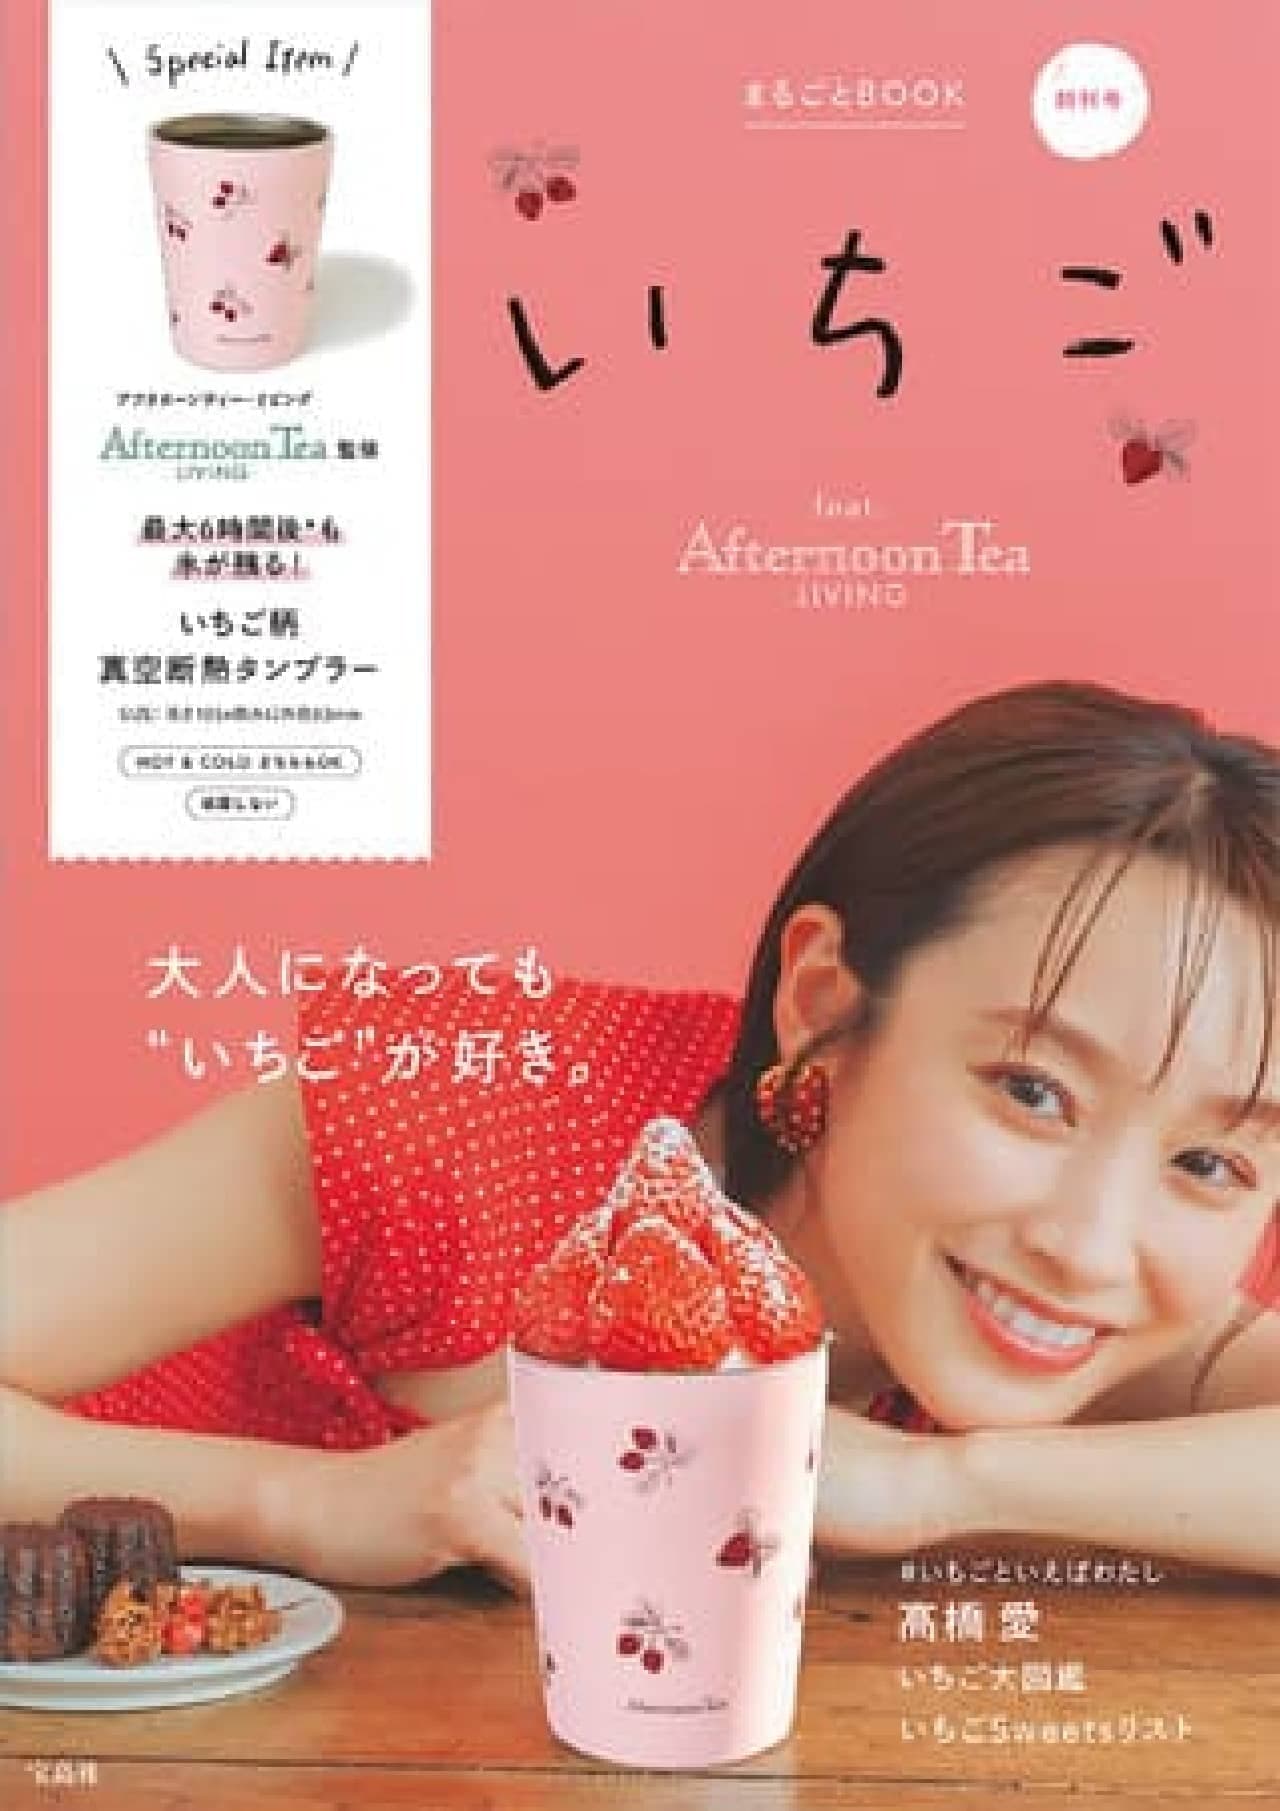 Strawberry Whole Book feat. Afternoon Tea LIVING" with hot and iced strawberry pattern tumbler!